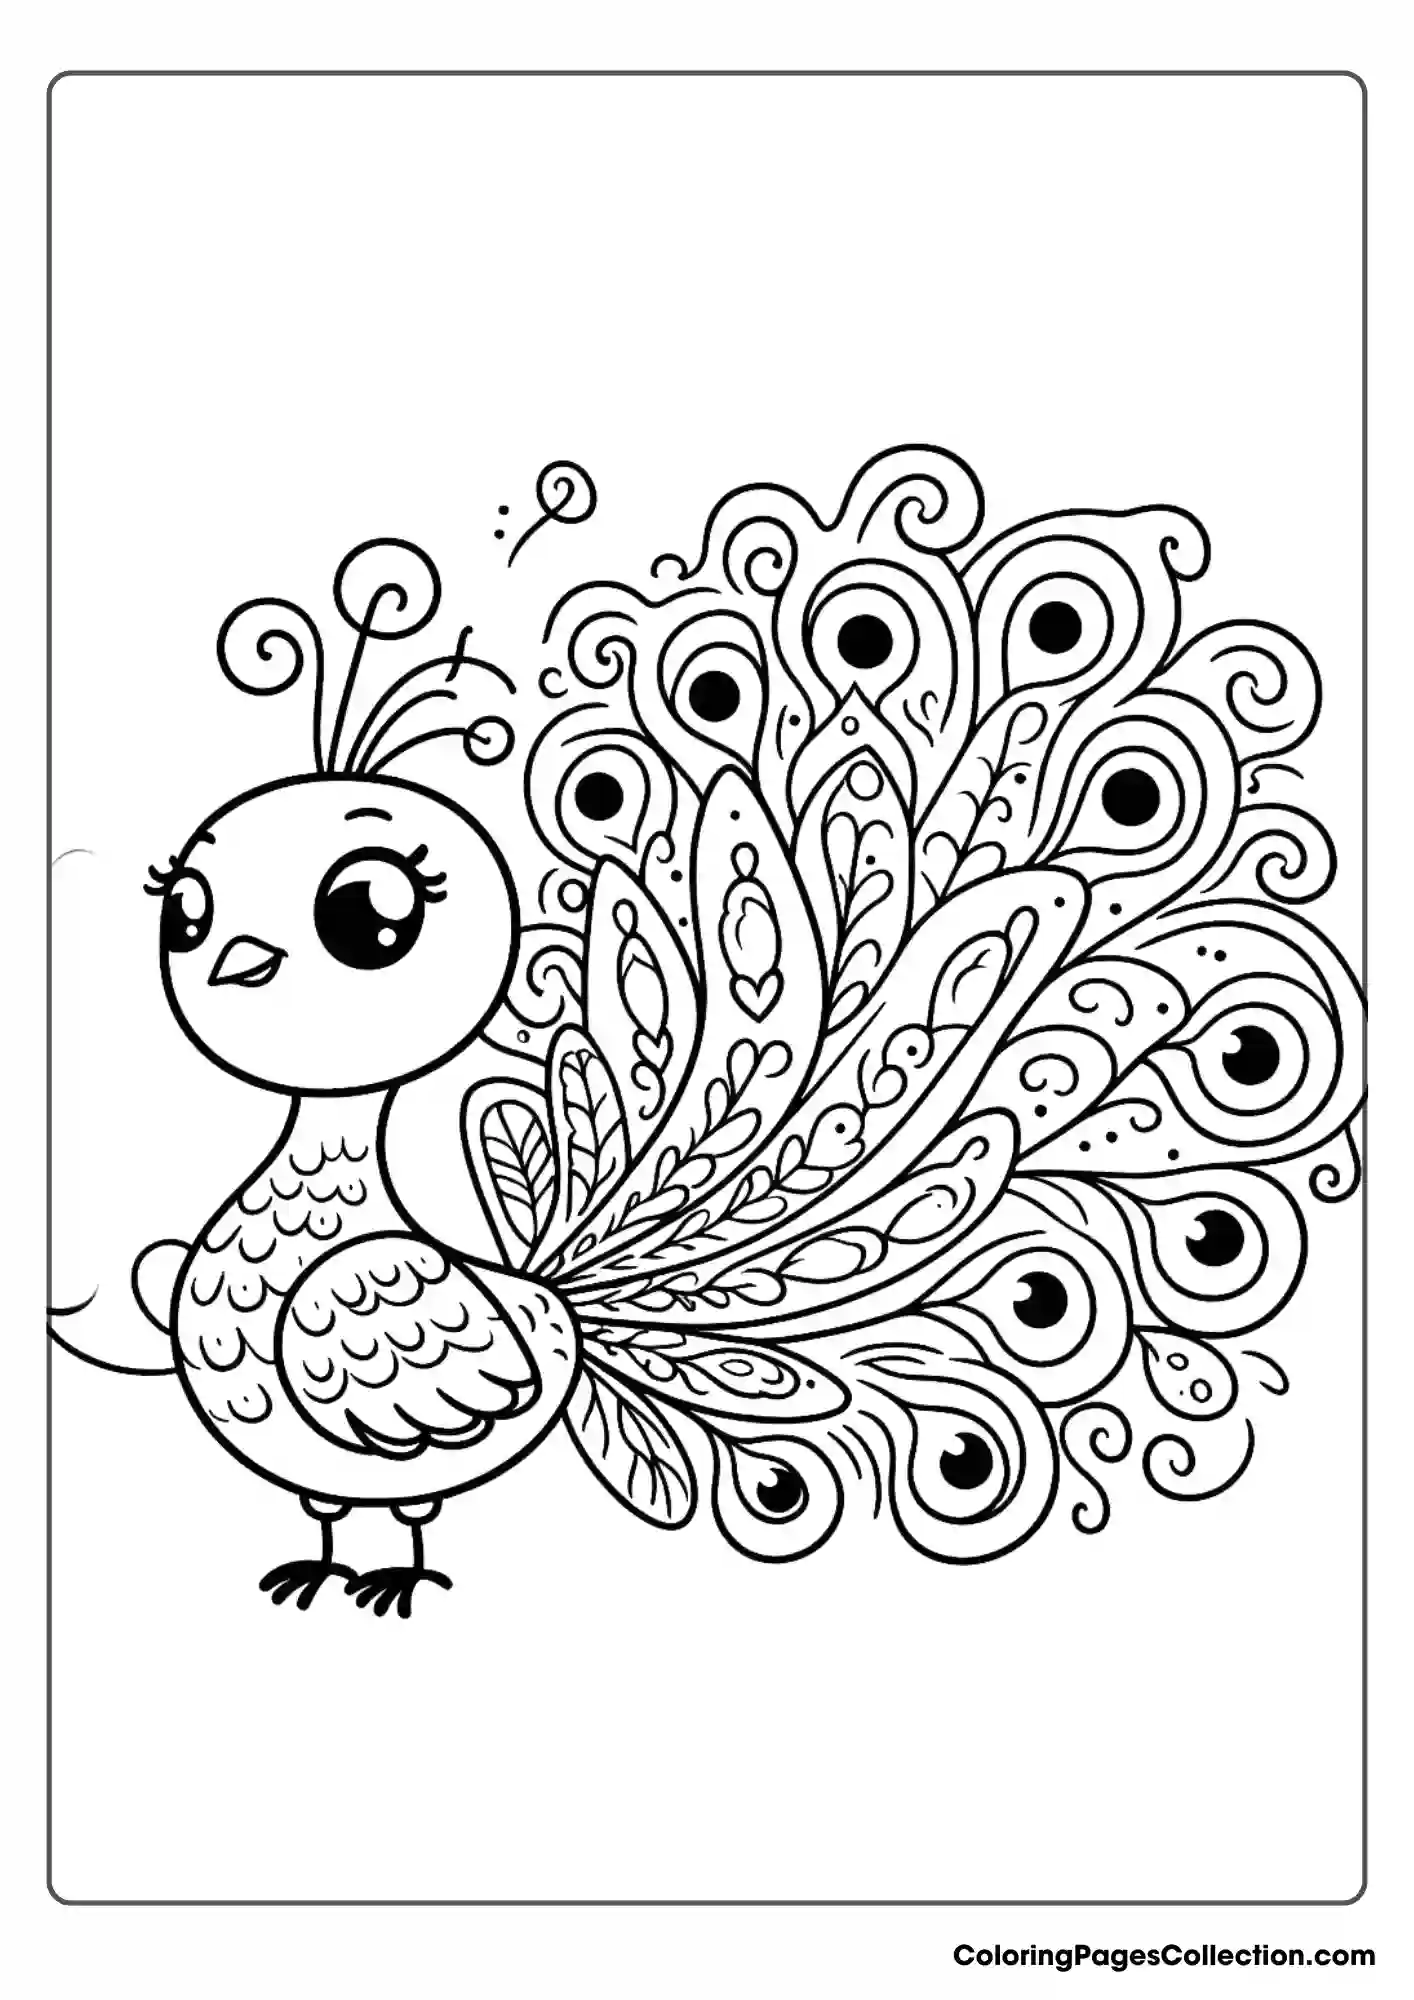 Peacock With Round